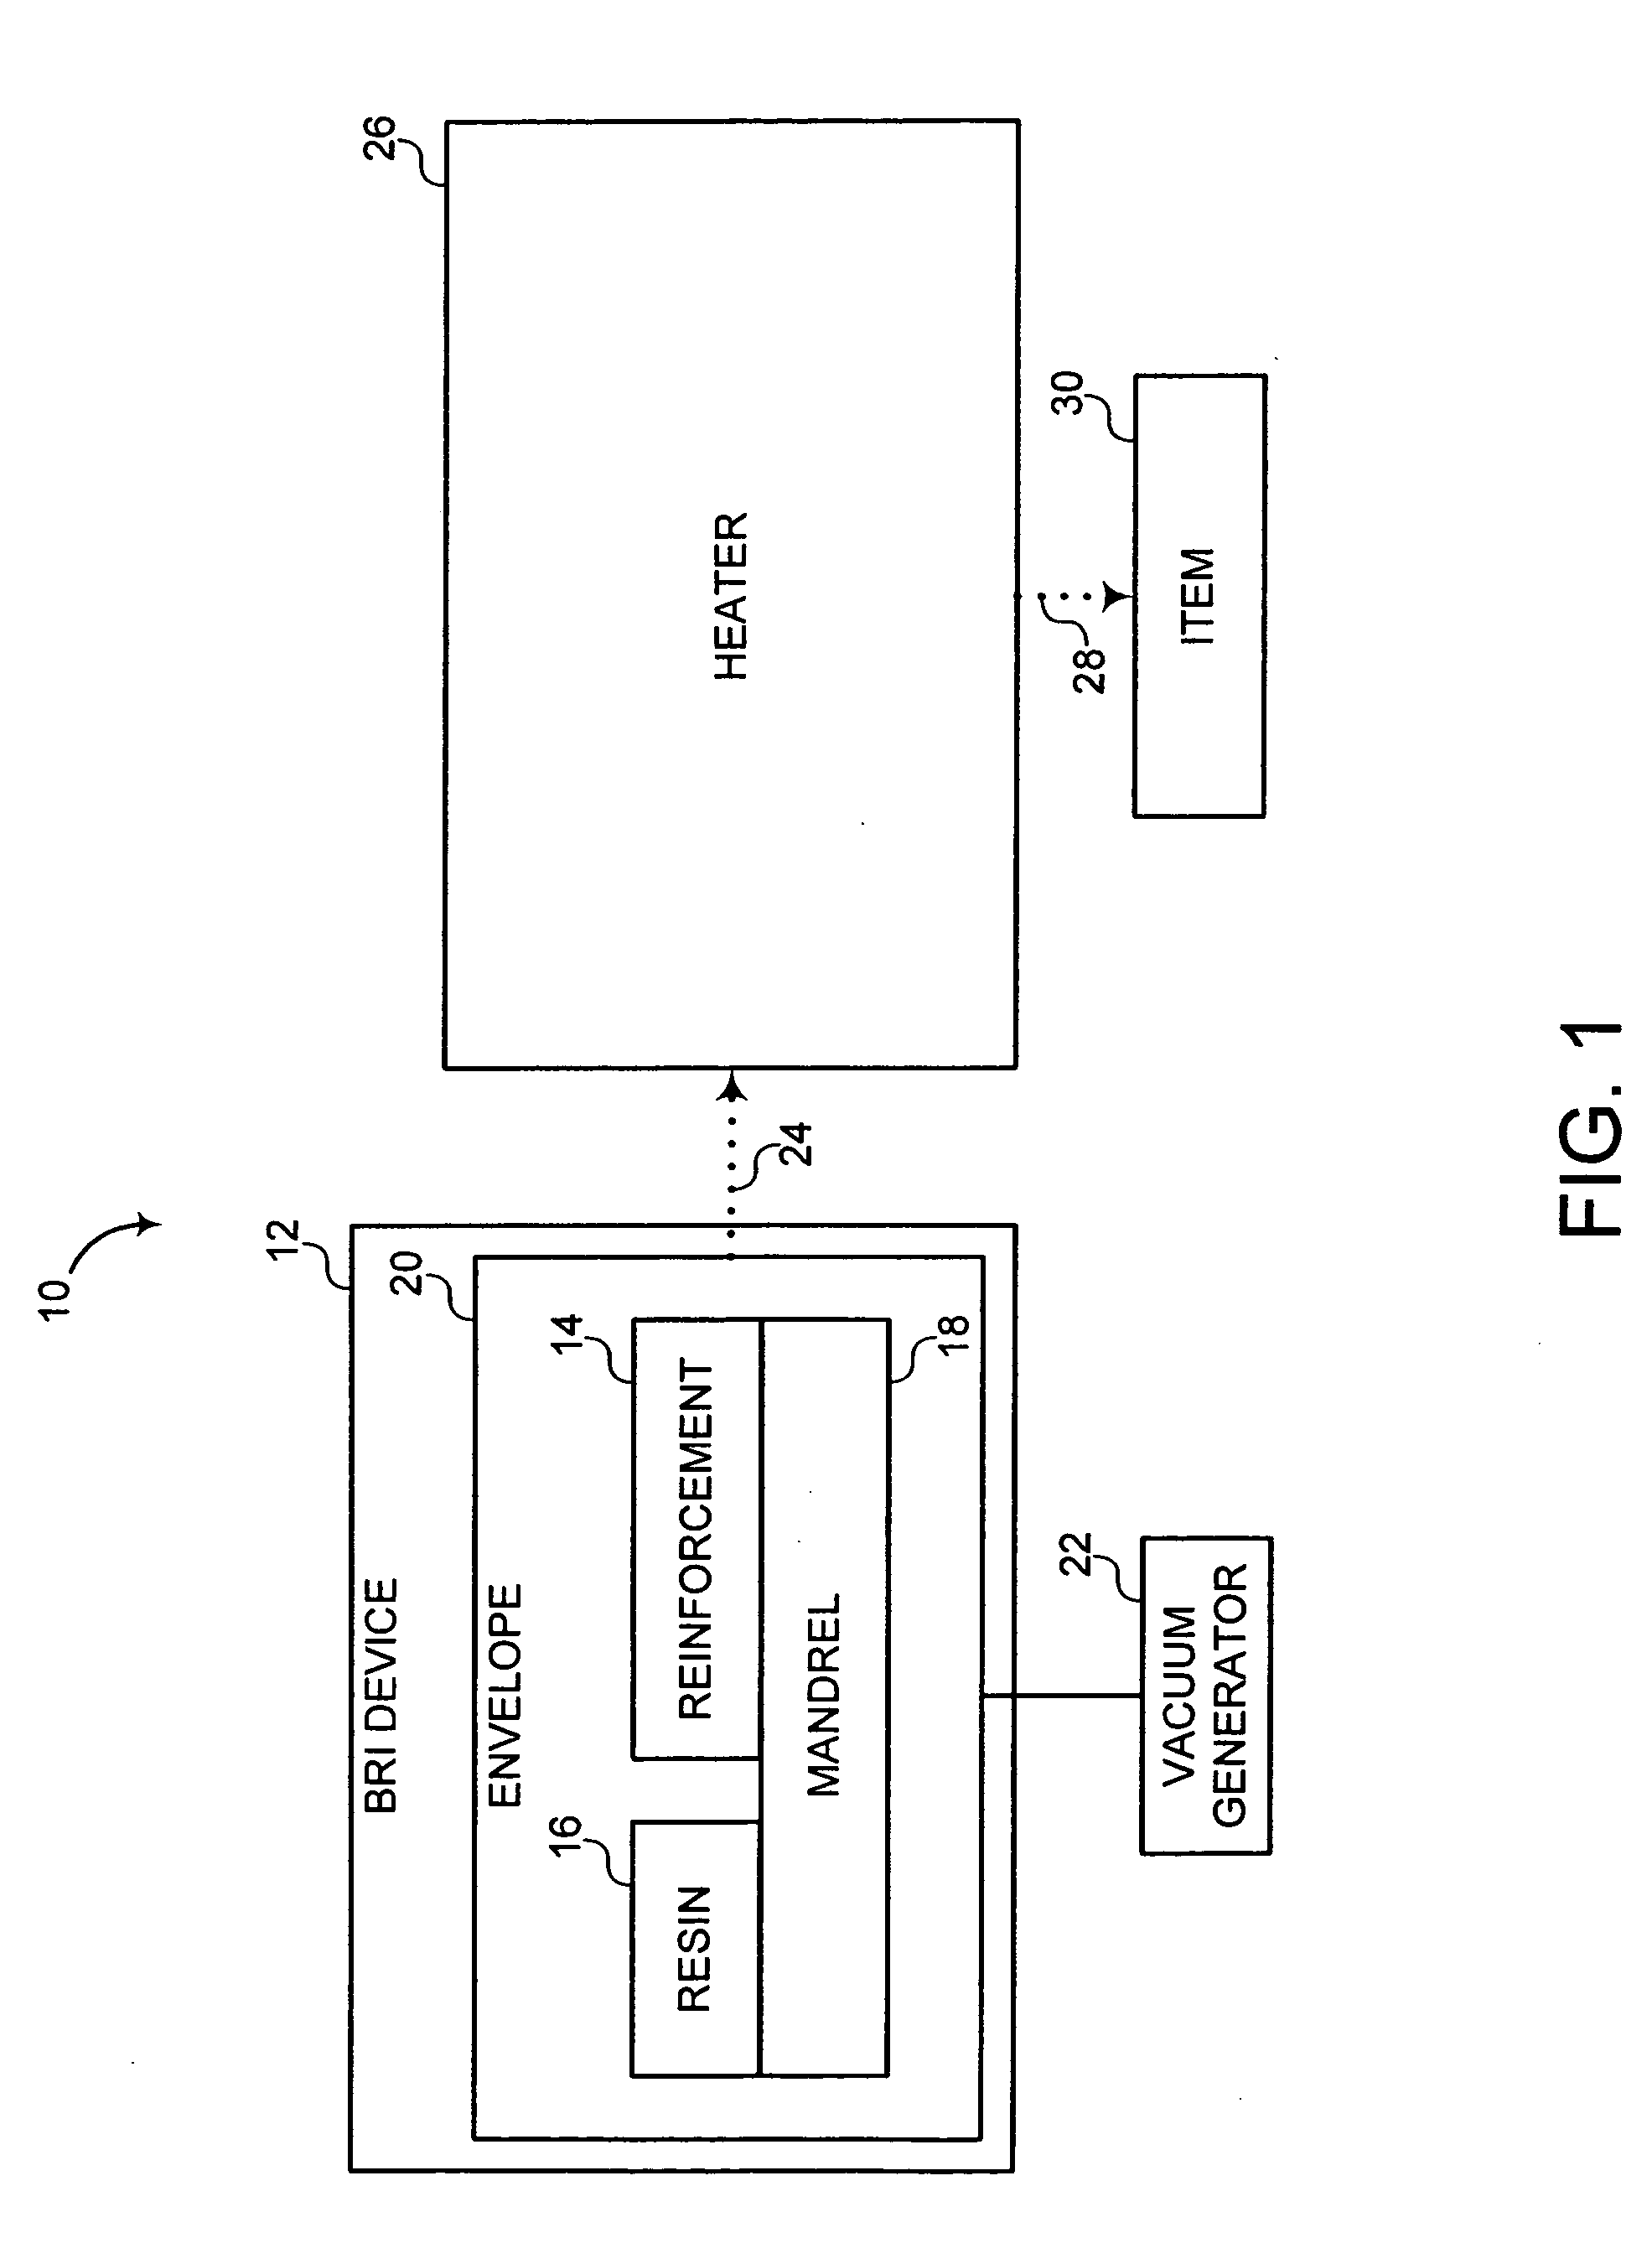 Bulk resin infusion system apparatus and method